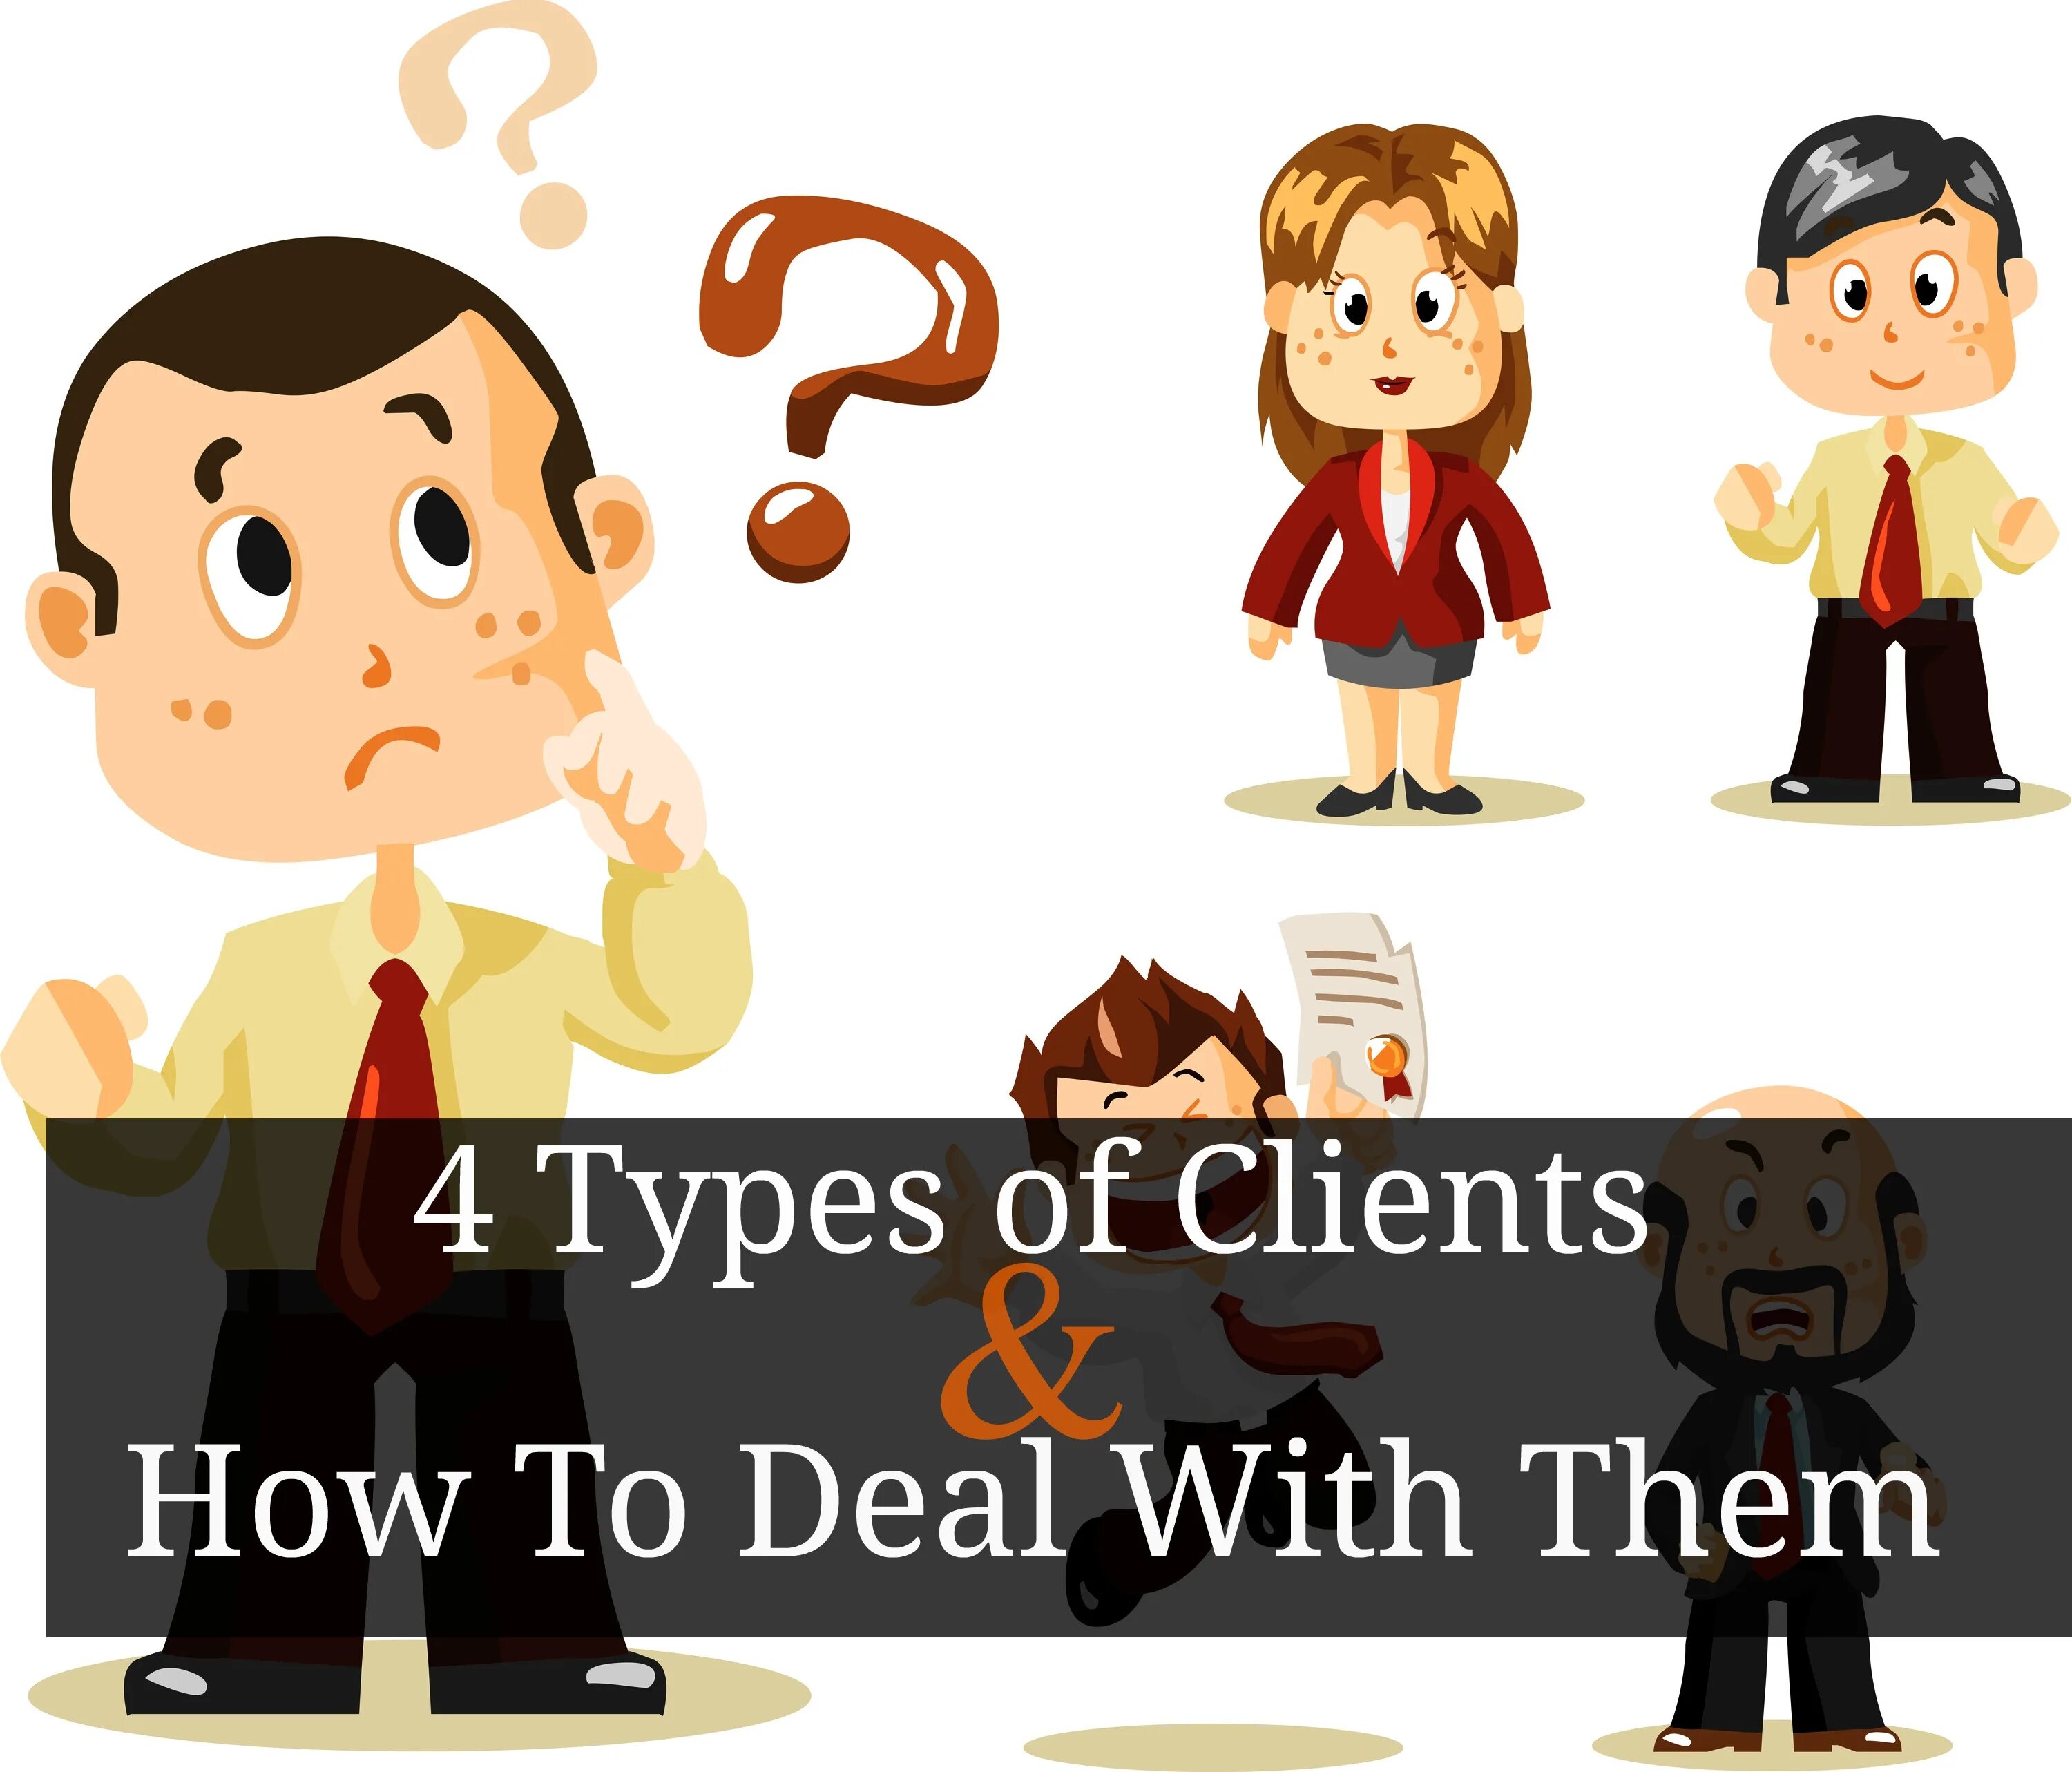 Client type 1. Types of clients. So how to deal with that.